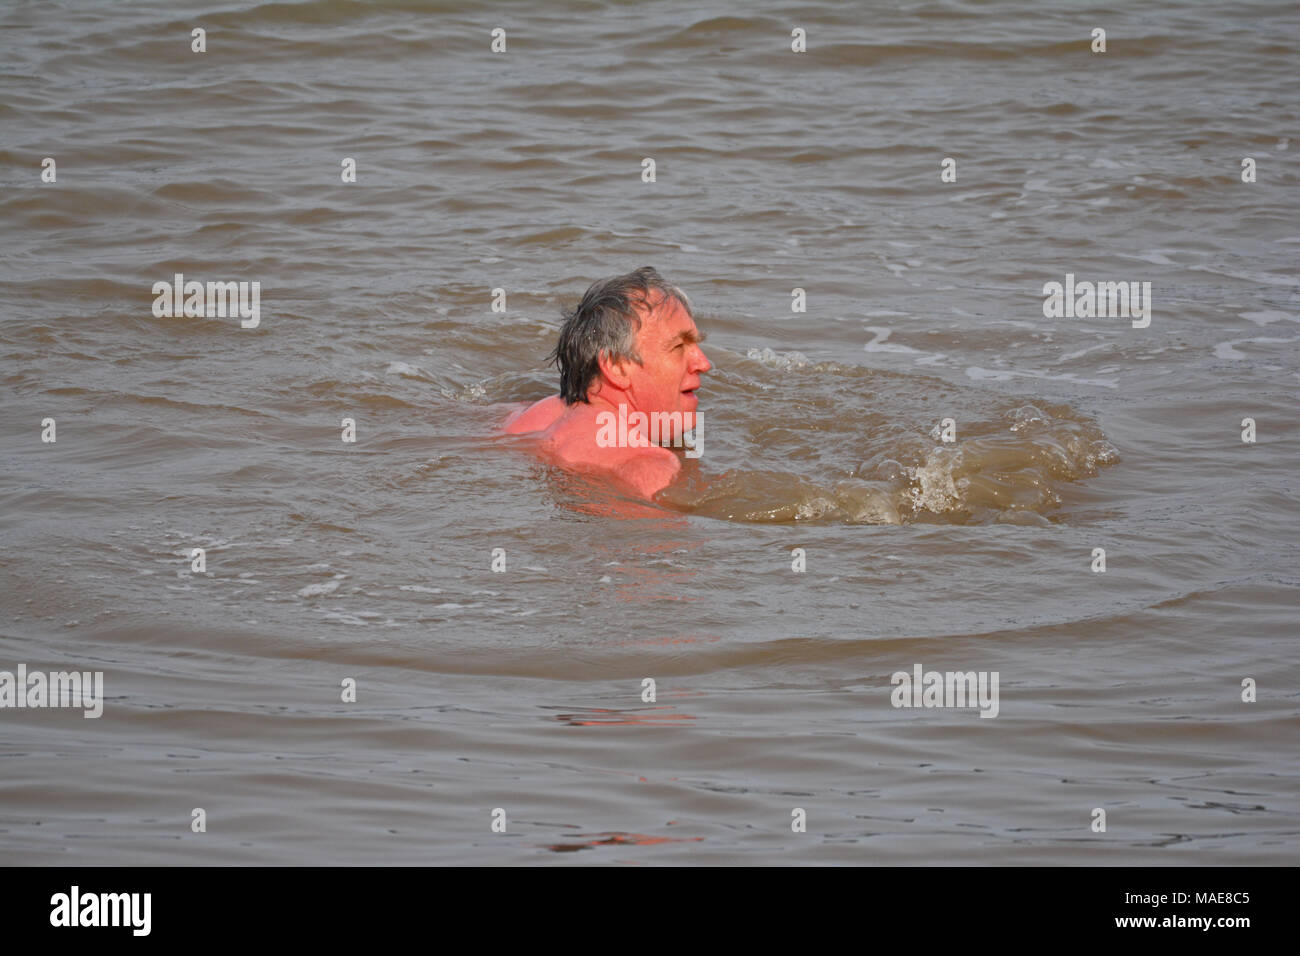 UK Weather. Easter Sunday morning at Clevedon Sea front. Robert Timoney/Alamy/Live/news Credit: Robert Timoney/Alamy Live News Credit: Robert Timoney/Alamy Live News Stock Photo